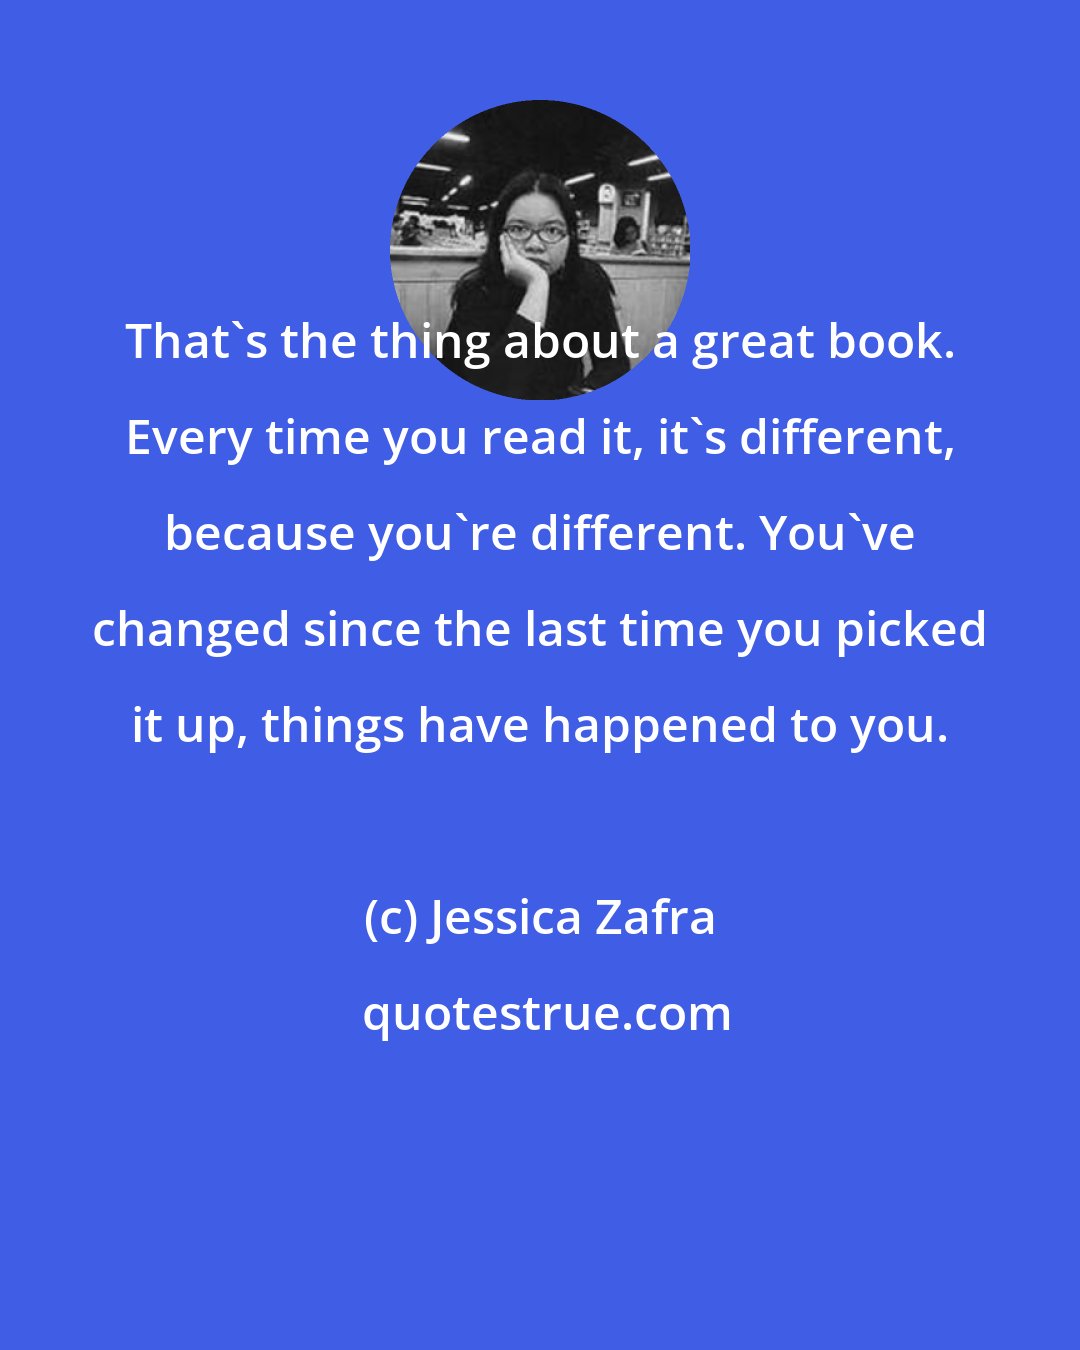 Jessica Zafra: That's the thing about a great book. Every time you read it, it's different, because you're different. You've changed since the last time you picked it up, things have happened to you.